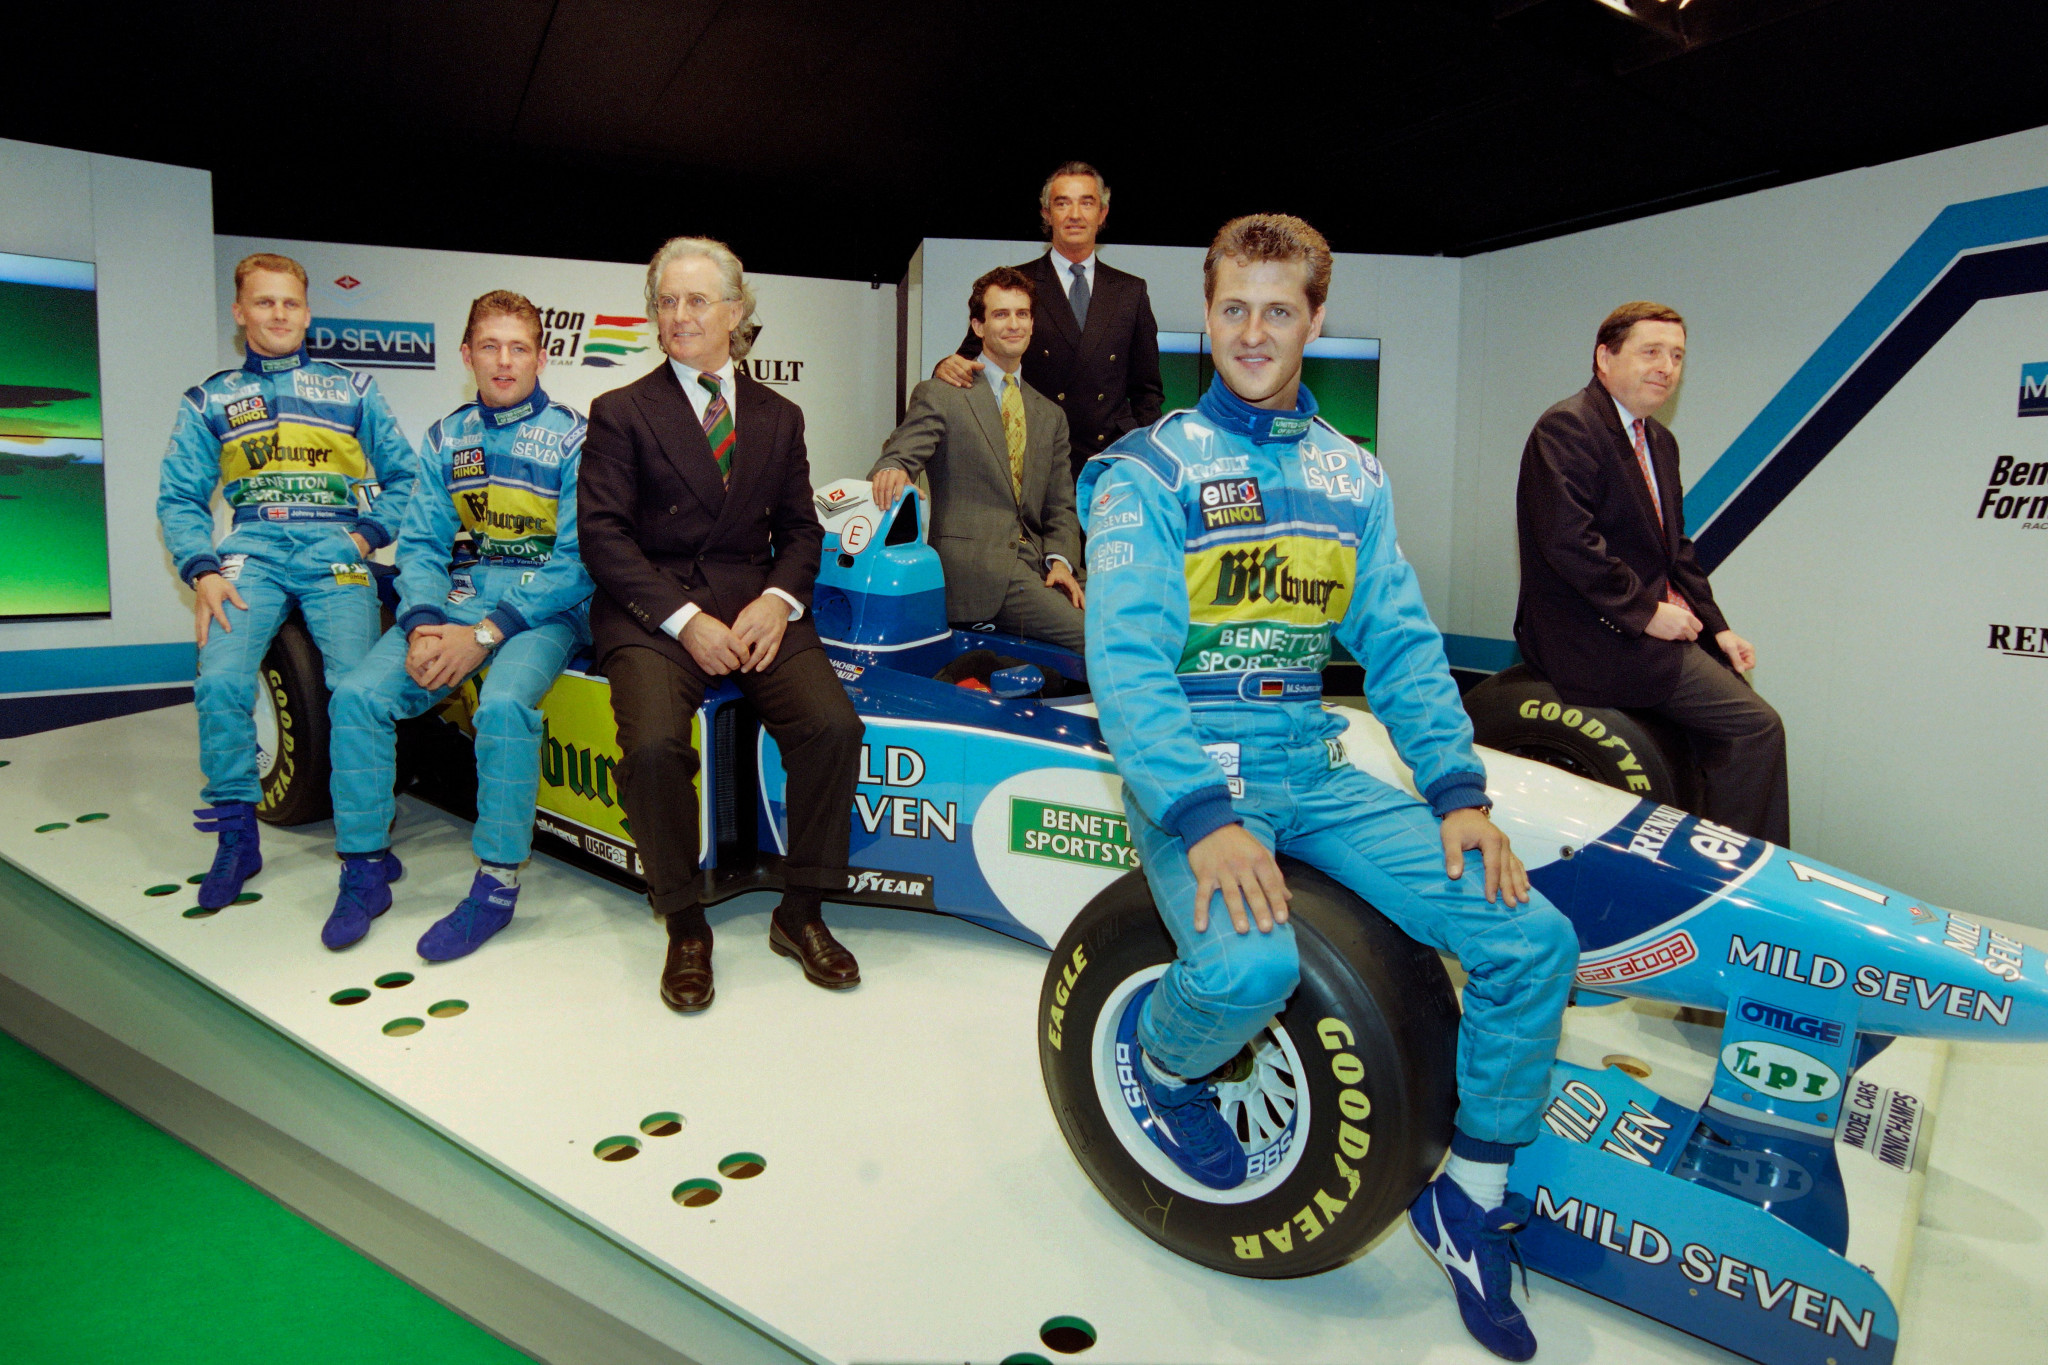 Alessandro Benetton was chairman of the Benetton Group during which Michael Schumacher won two Formula One world titles ©Getty Images